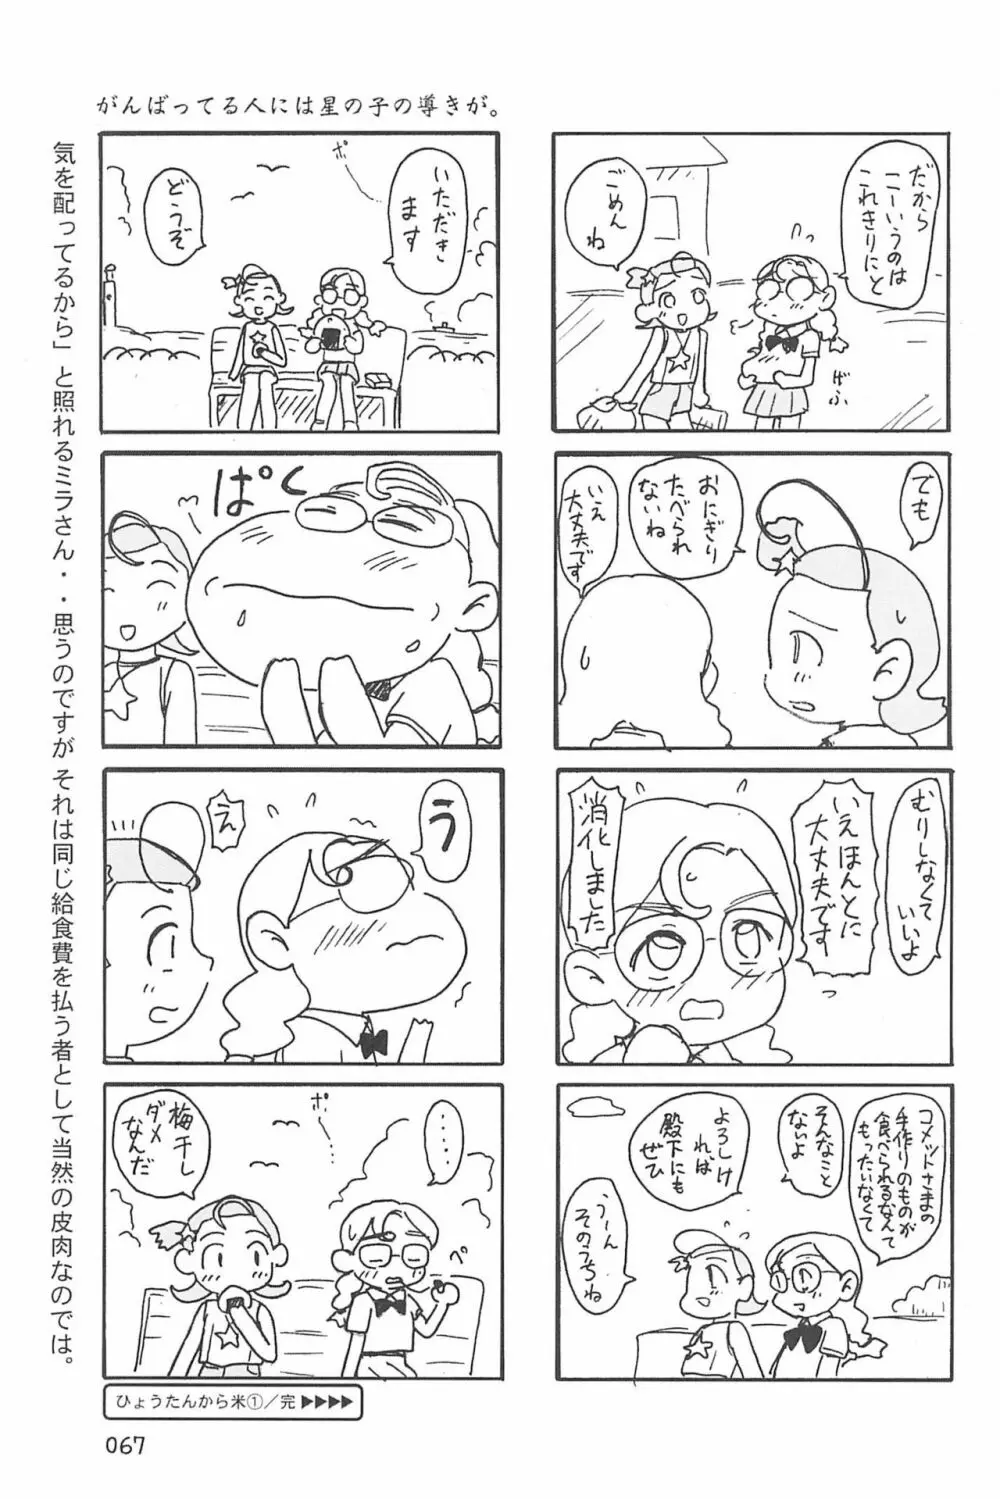 ND-special Volume 4 67ページ